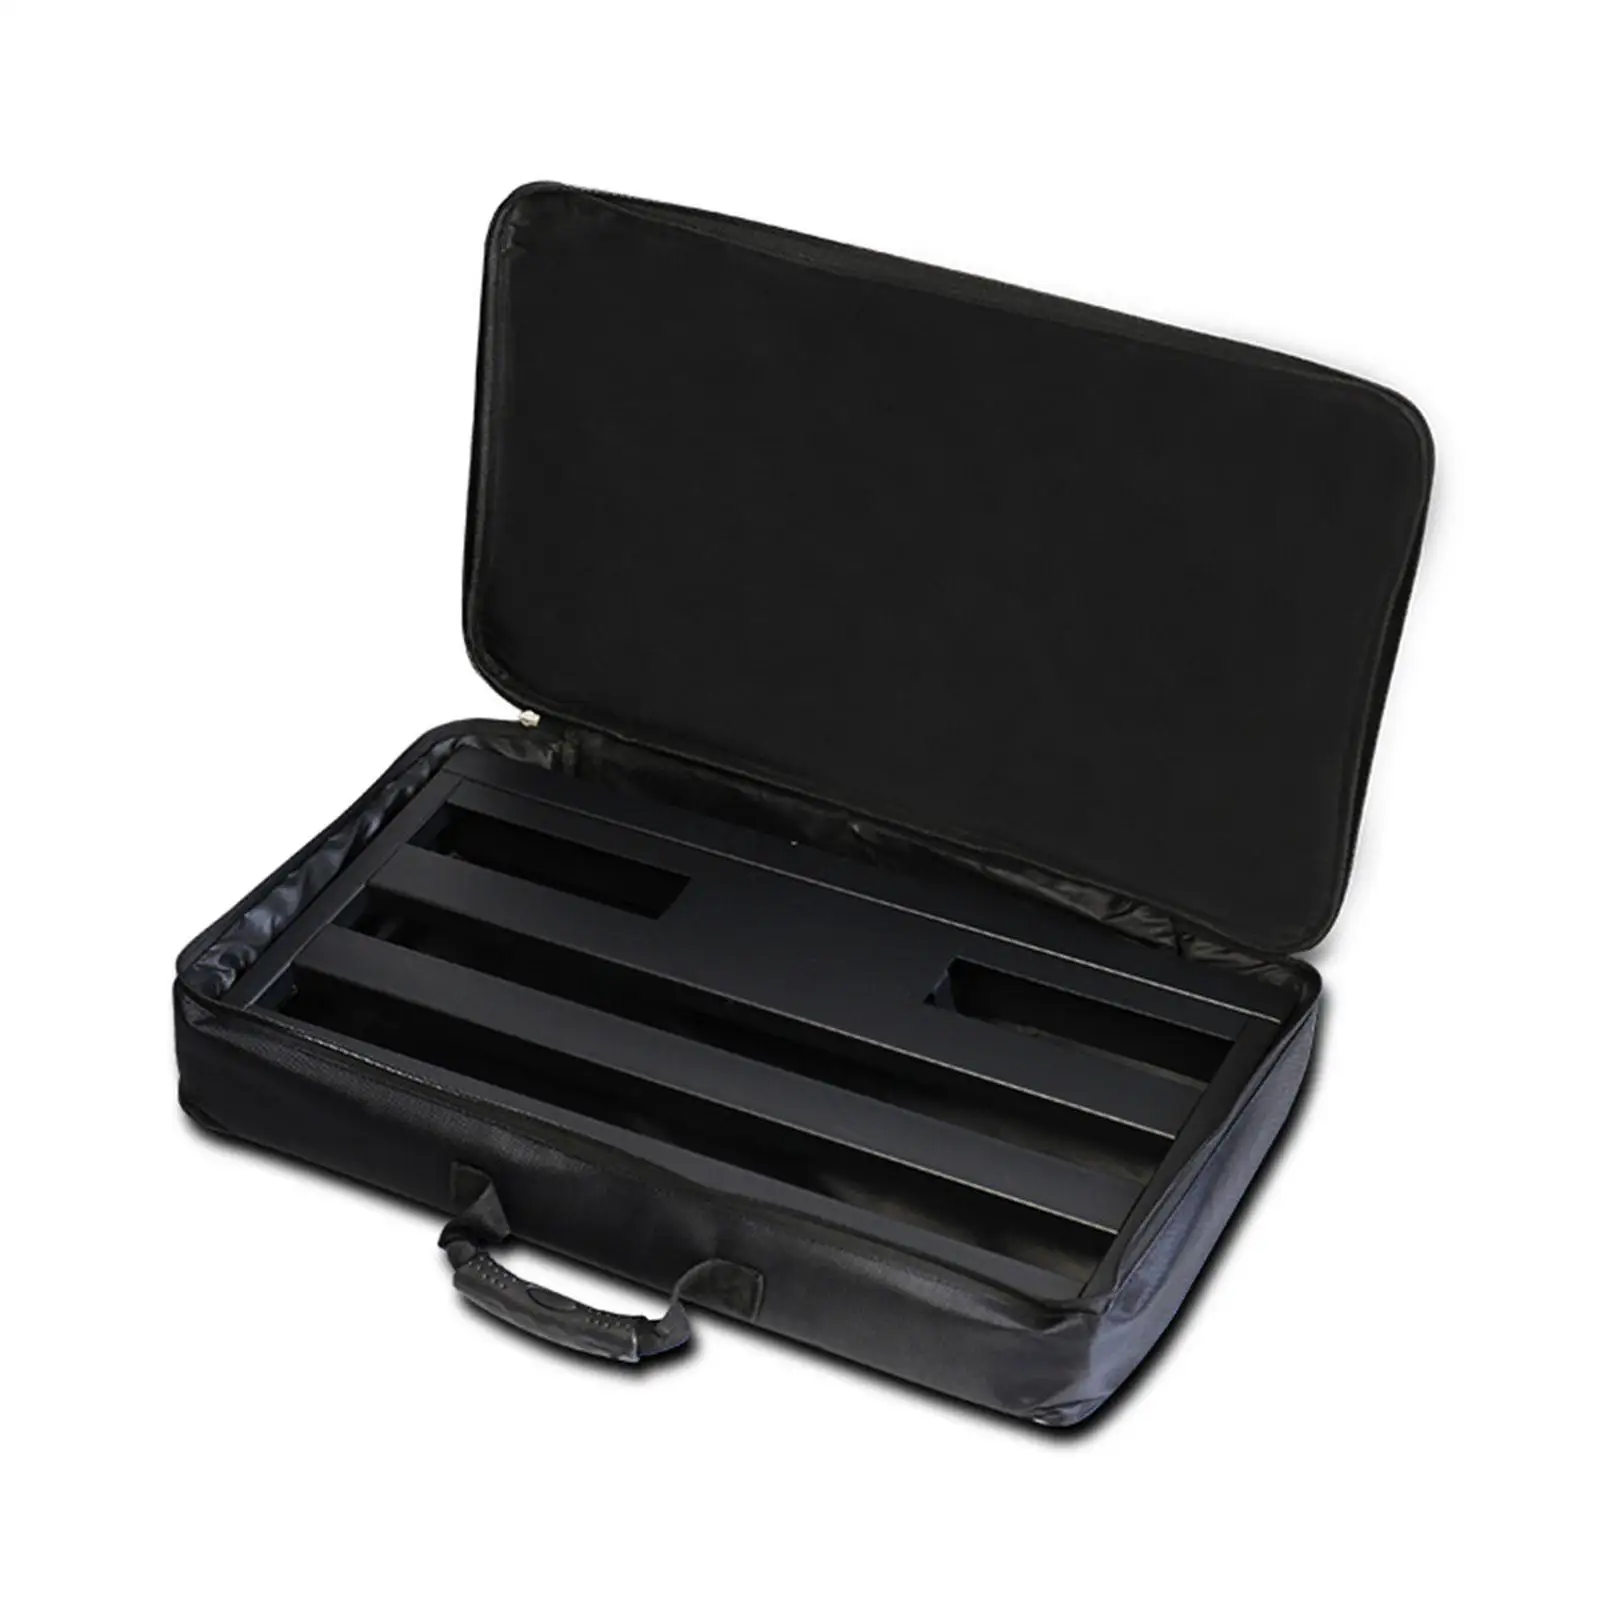 Oxford Cloth Pedalboard Case Carry Bag Waterproof for DJ Controllers Guitar Pedals Micro Synths Accessory